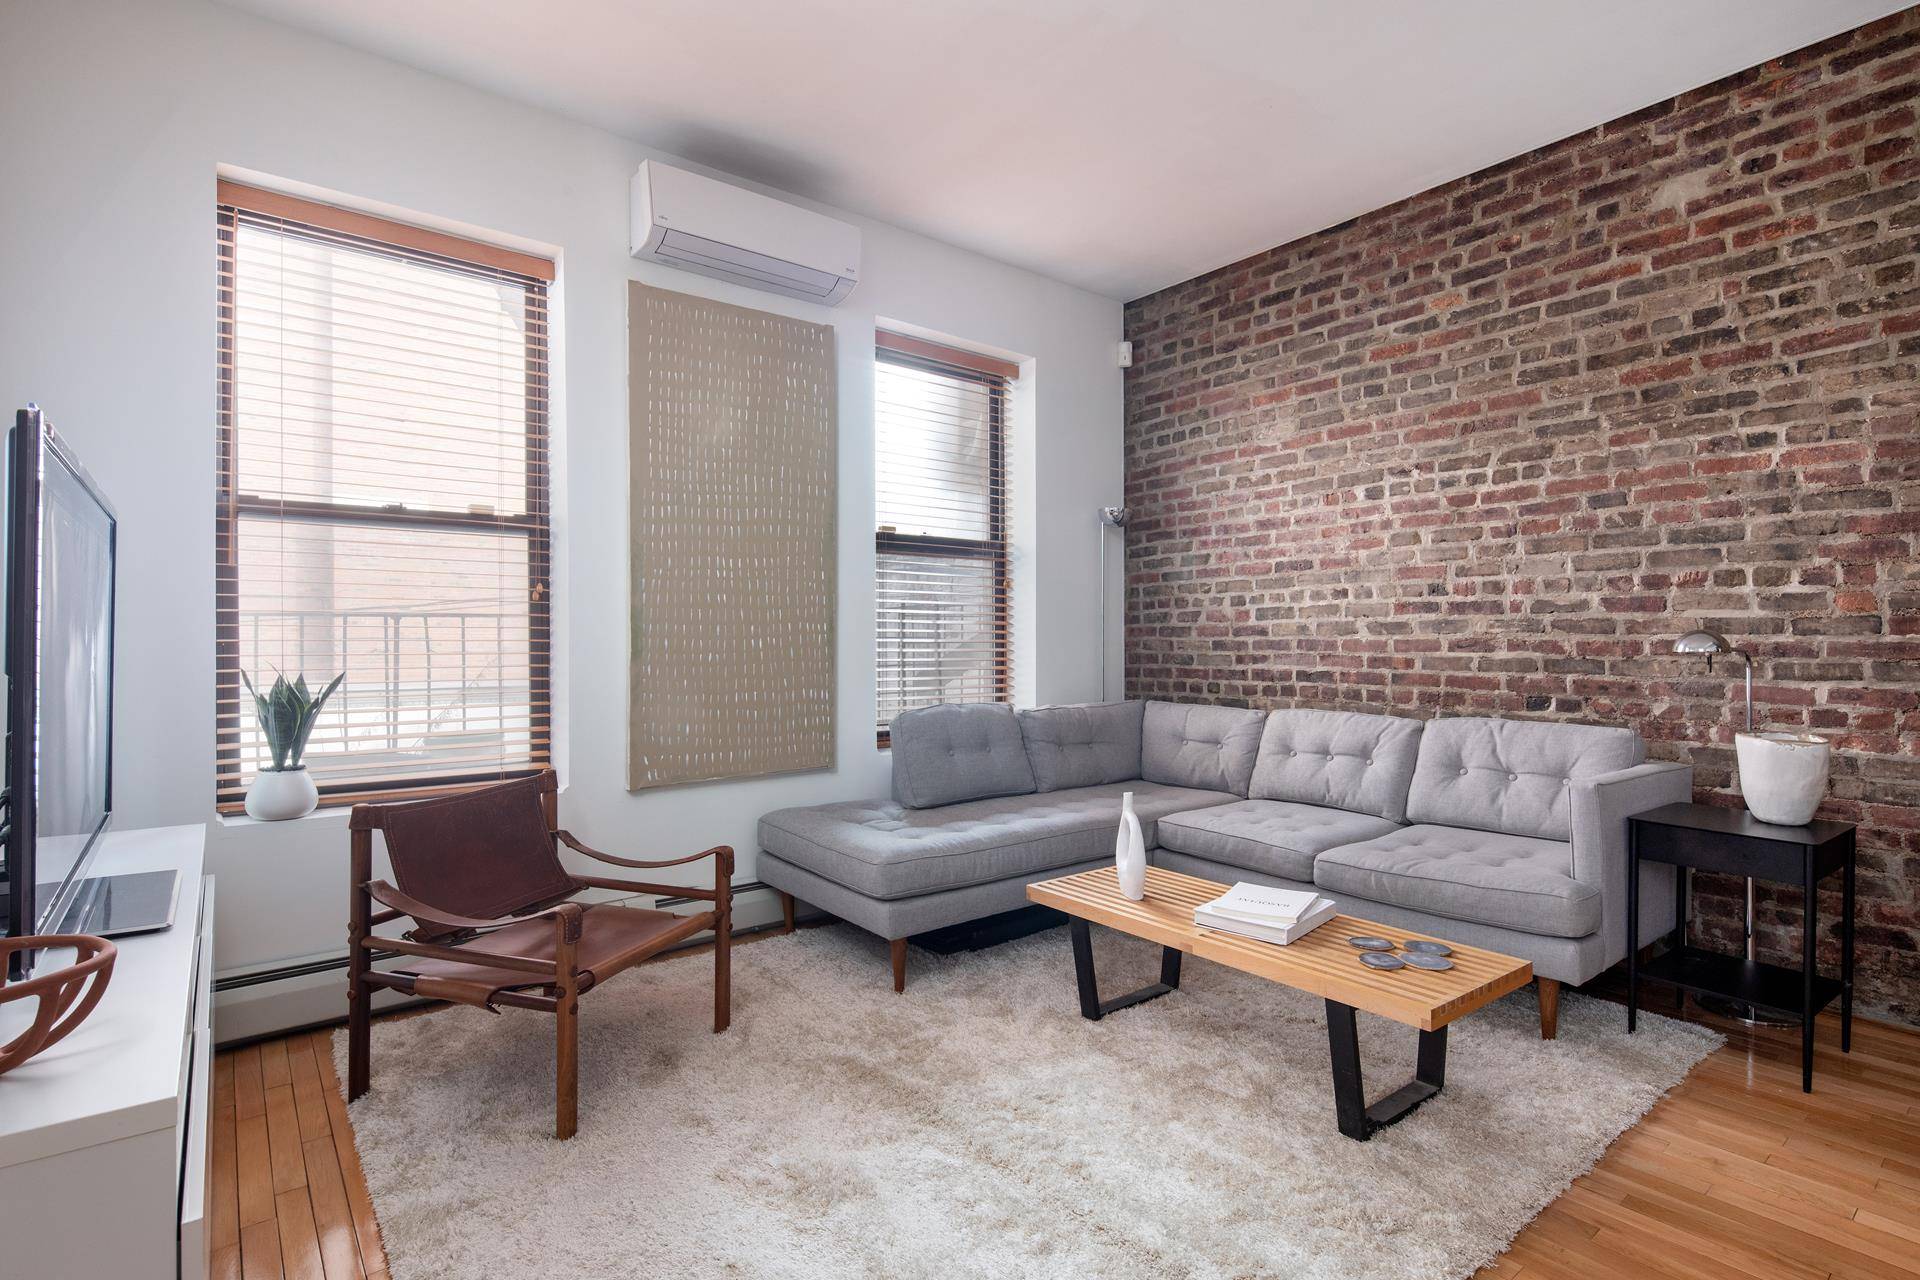 This charming one bedroom, one bathroom condominium ticks every box with beautifully updated contemporary interiors and a fantastic location in the heart of Bedford Stuyvesant.